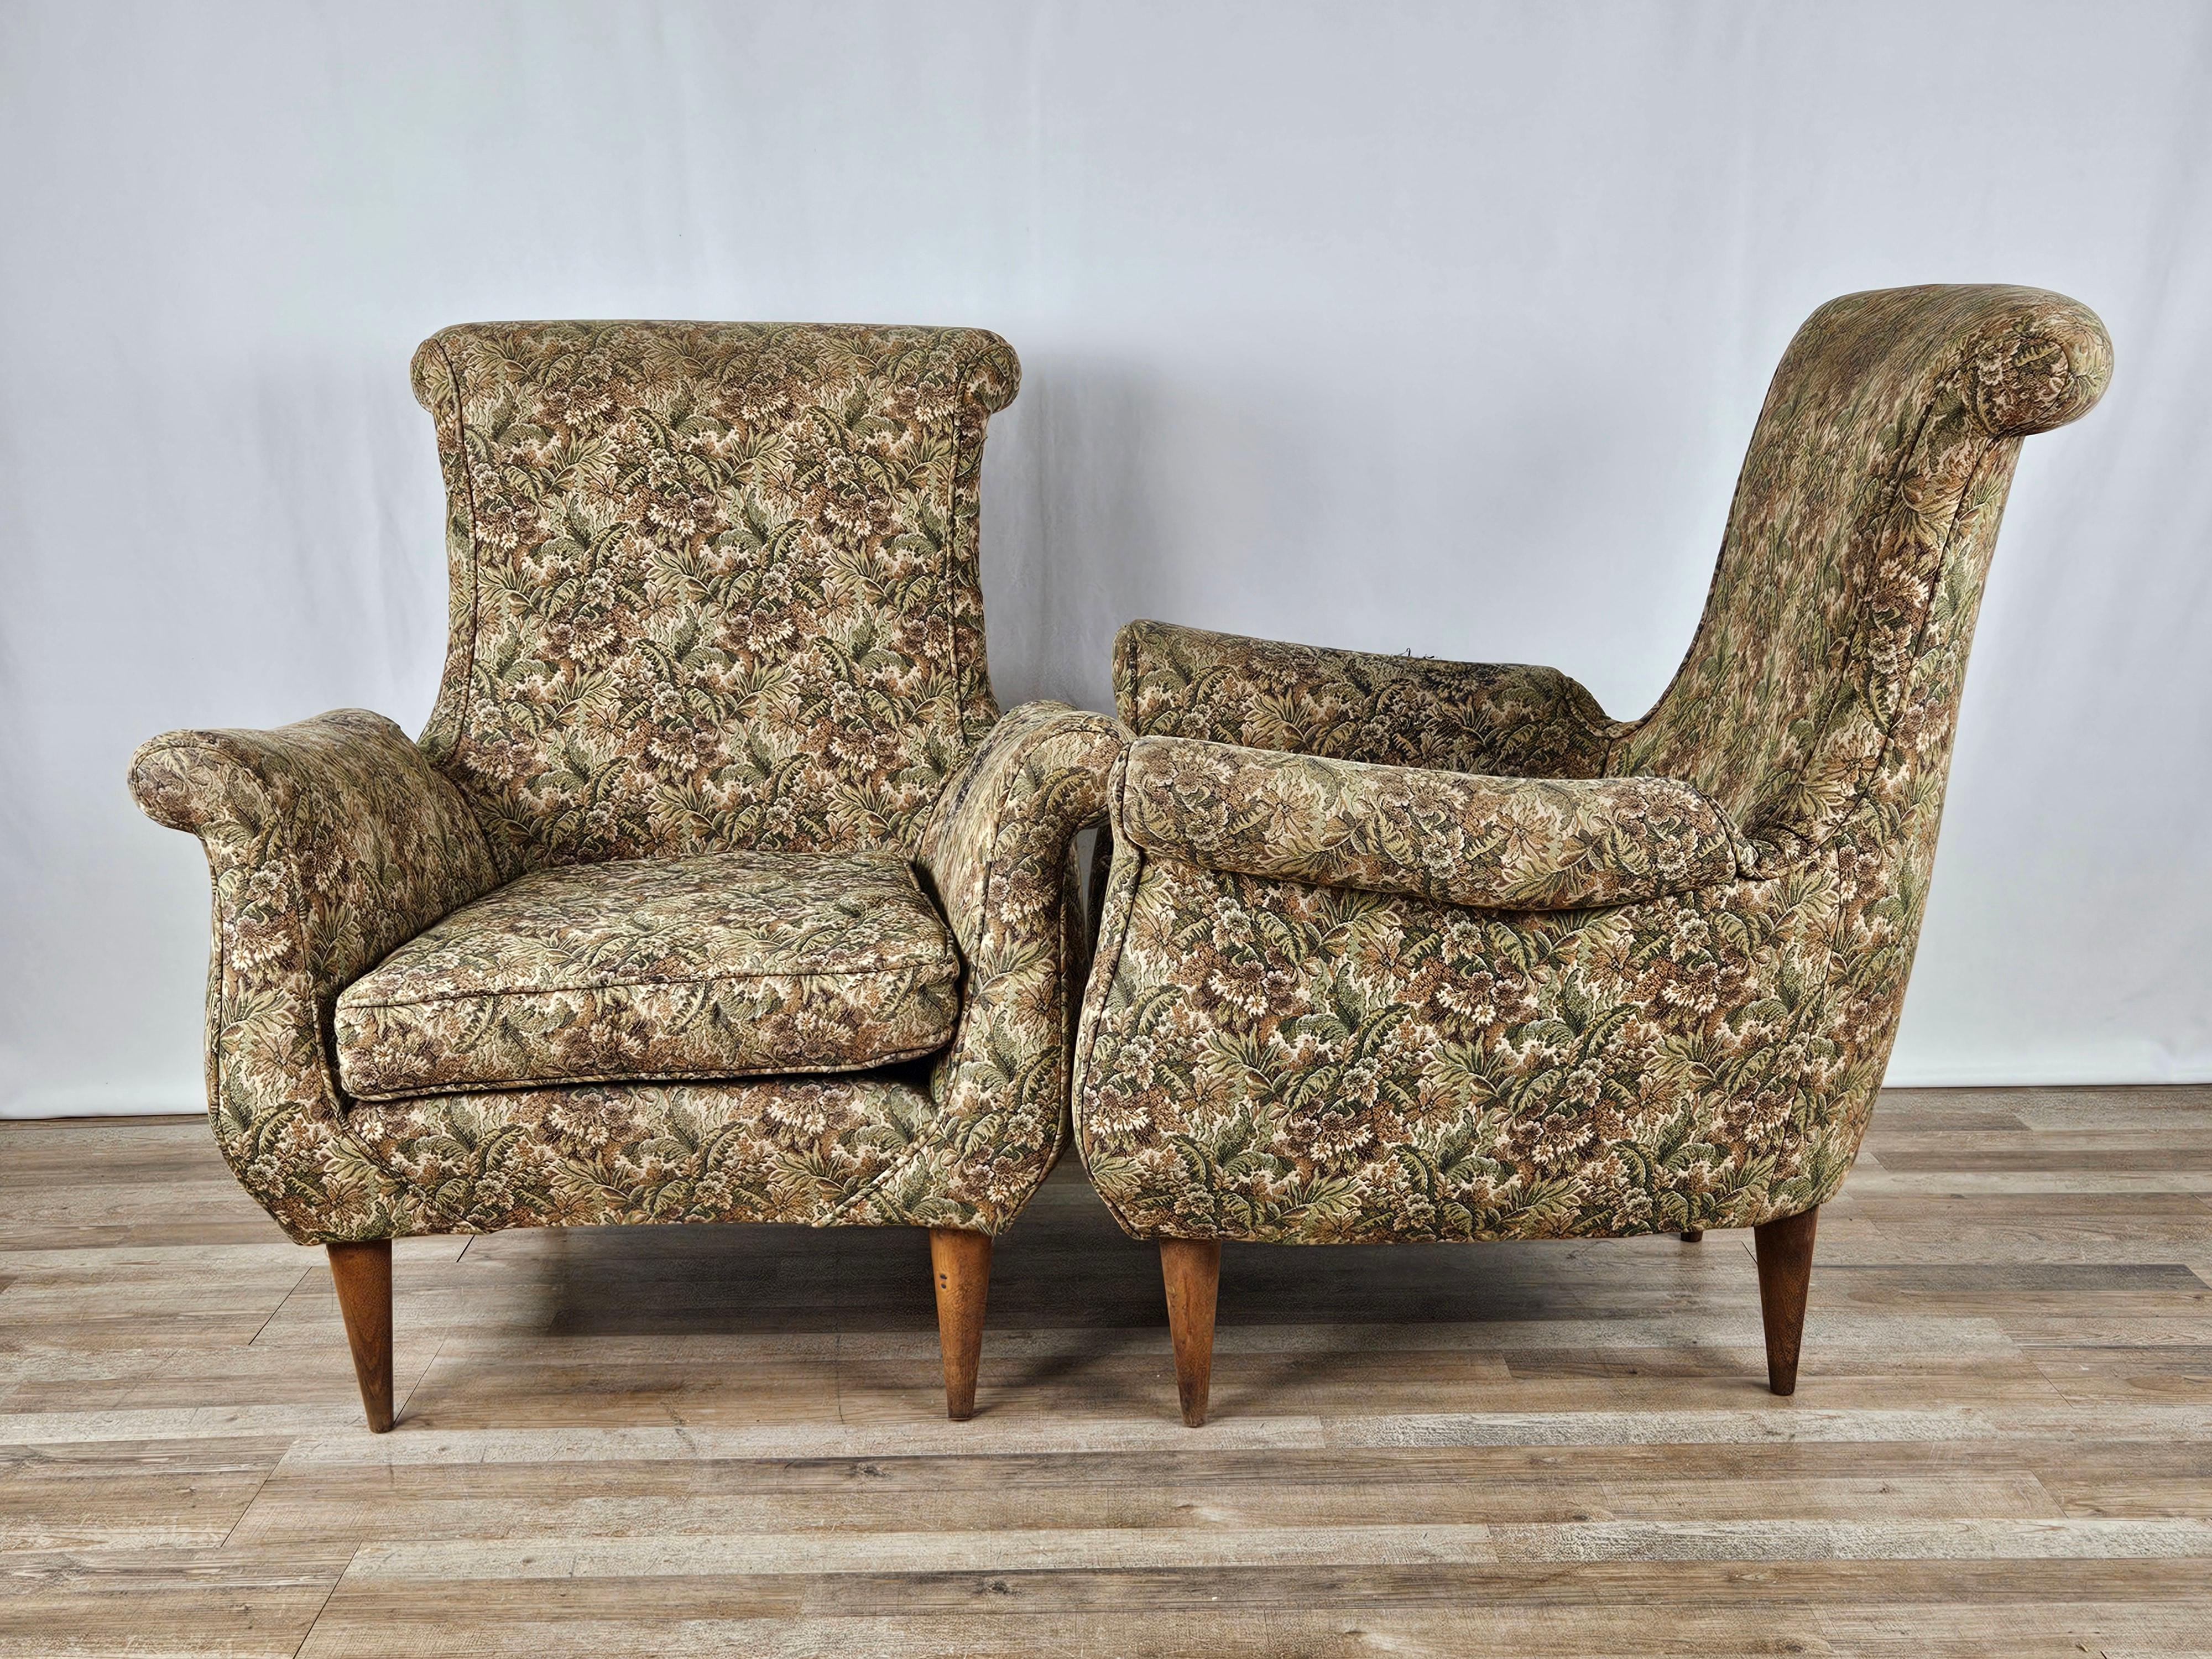 1970s floral fabric armchairs with wooden feet In Good Condition For Sale In Premariacco, IT